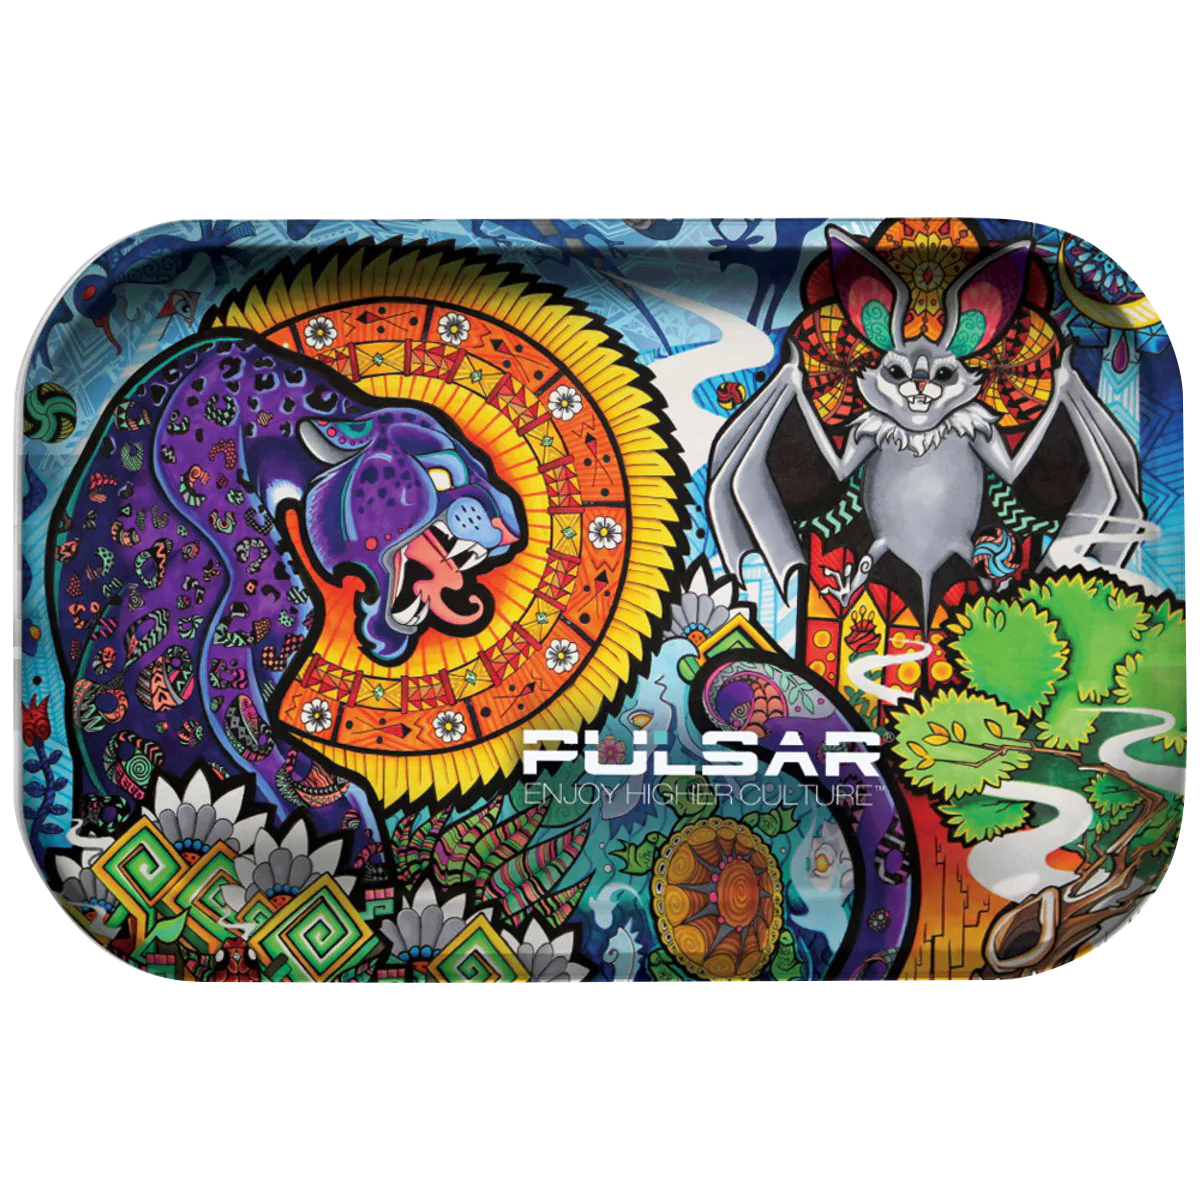 Pulsar Psychedelic Jungle Metal Rolling Tray with vibrant artwork, 11" x 7" size, top view